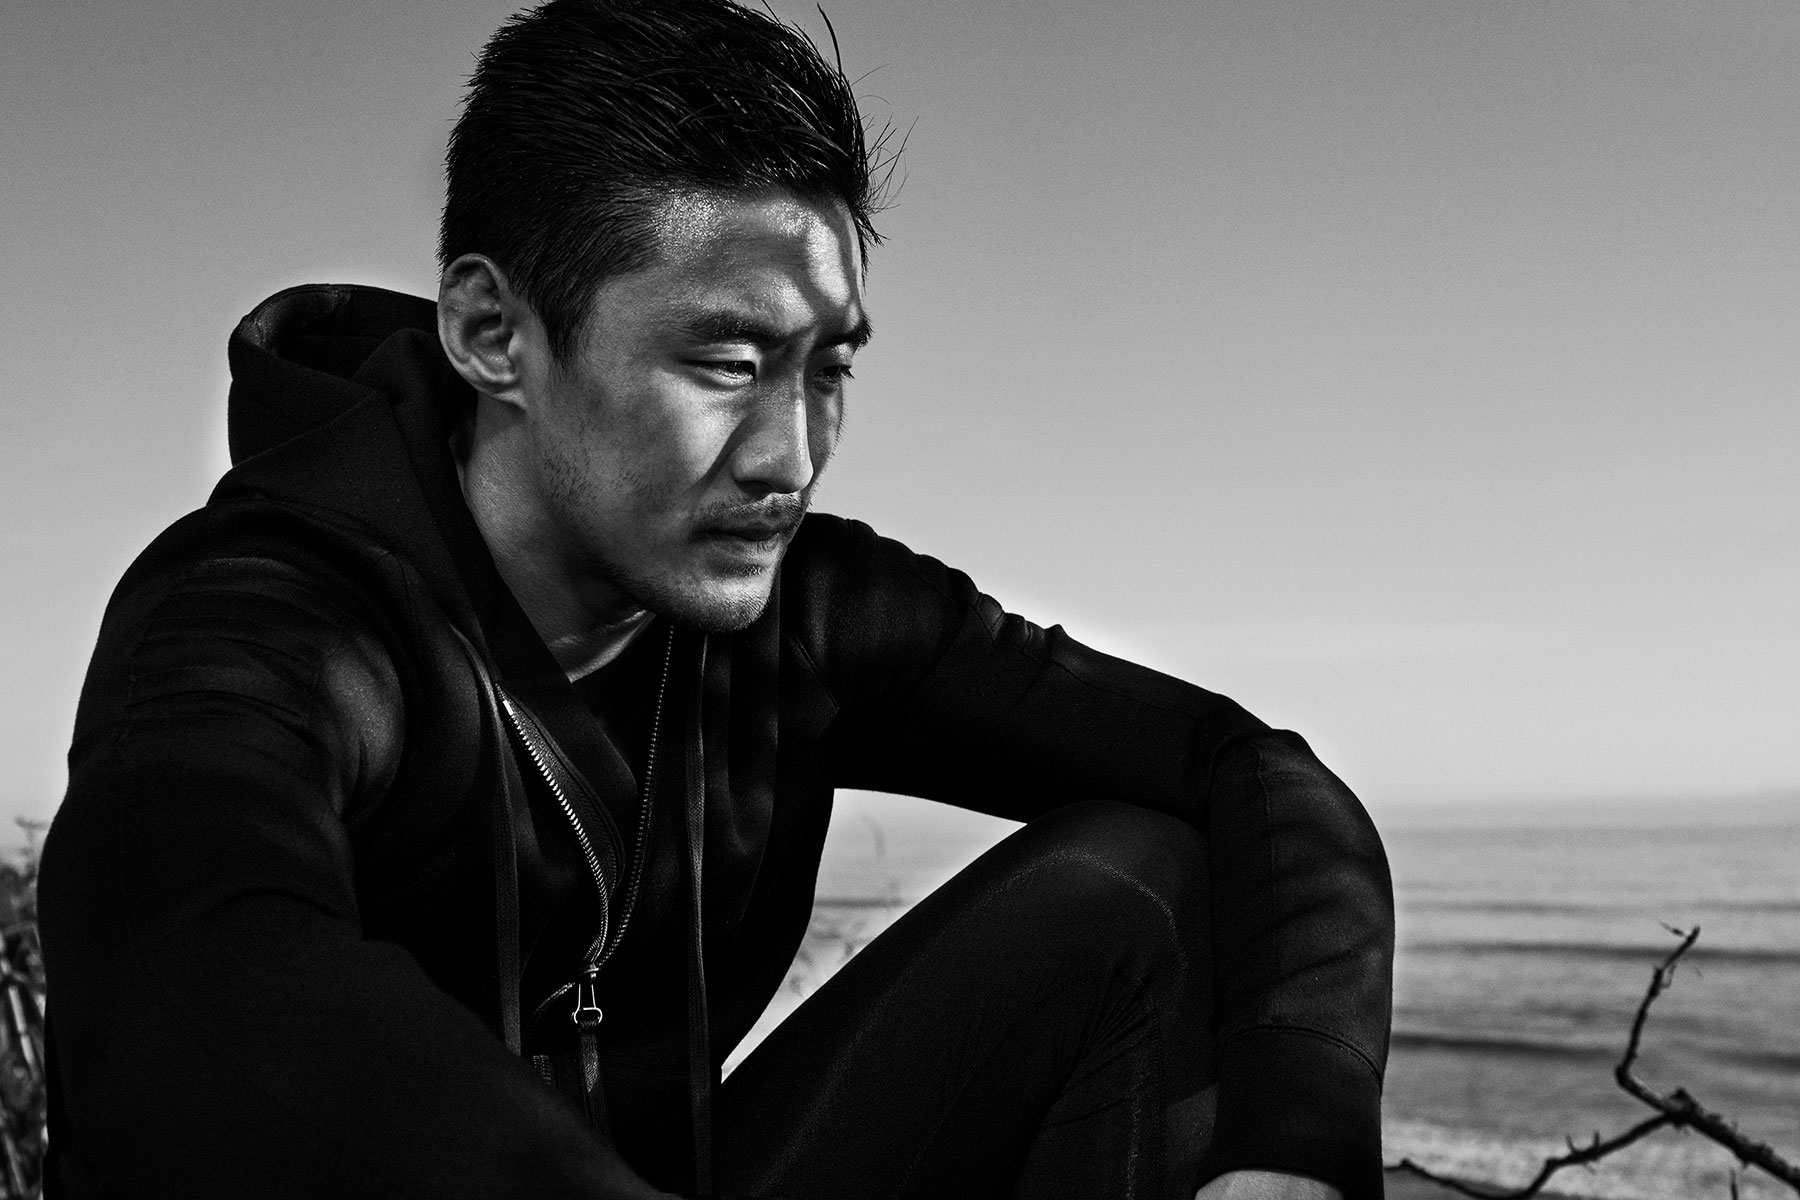 Actor and Muay Thai athlete, Jasper Jeon, film and stills by director Scott Council